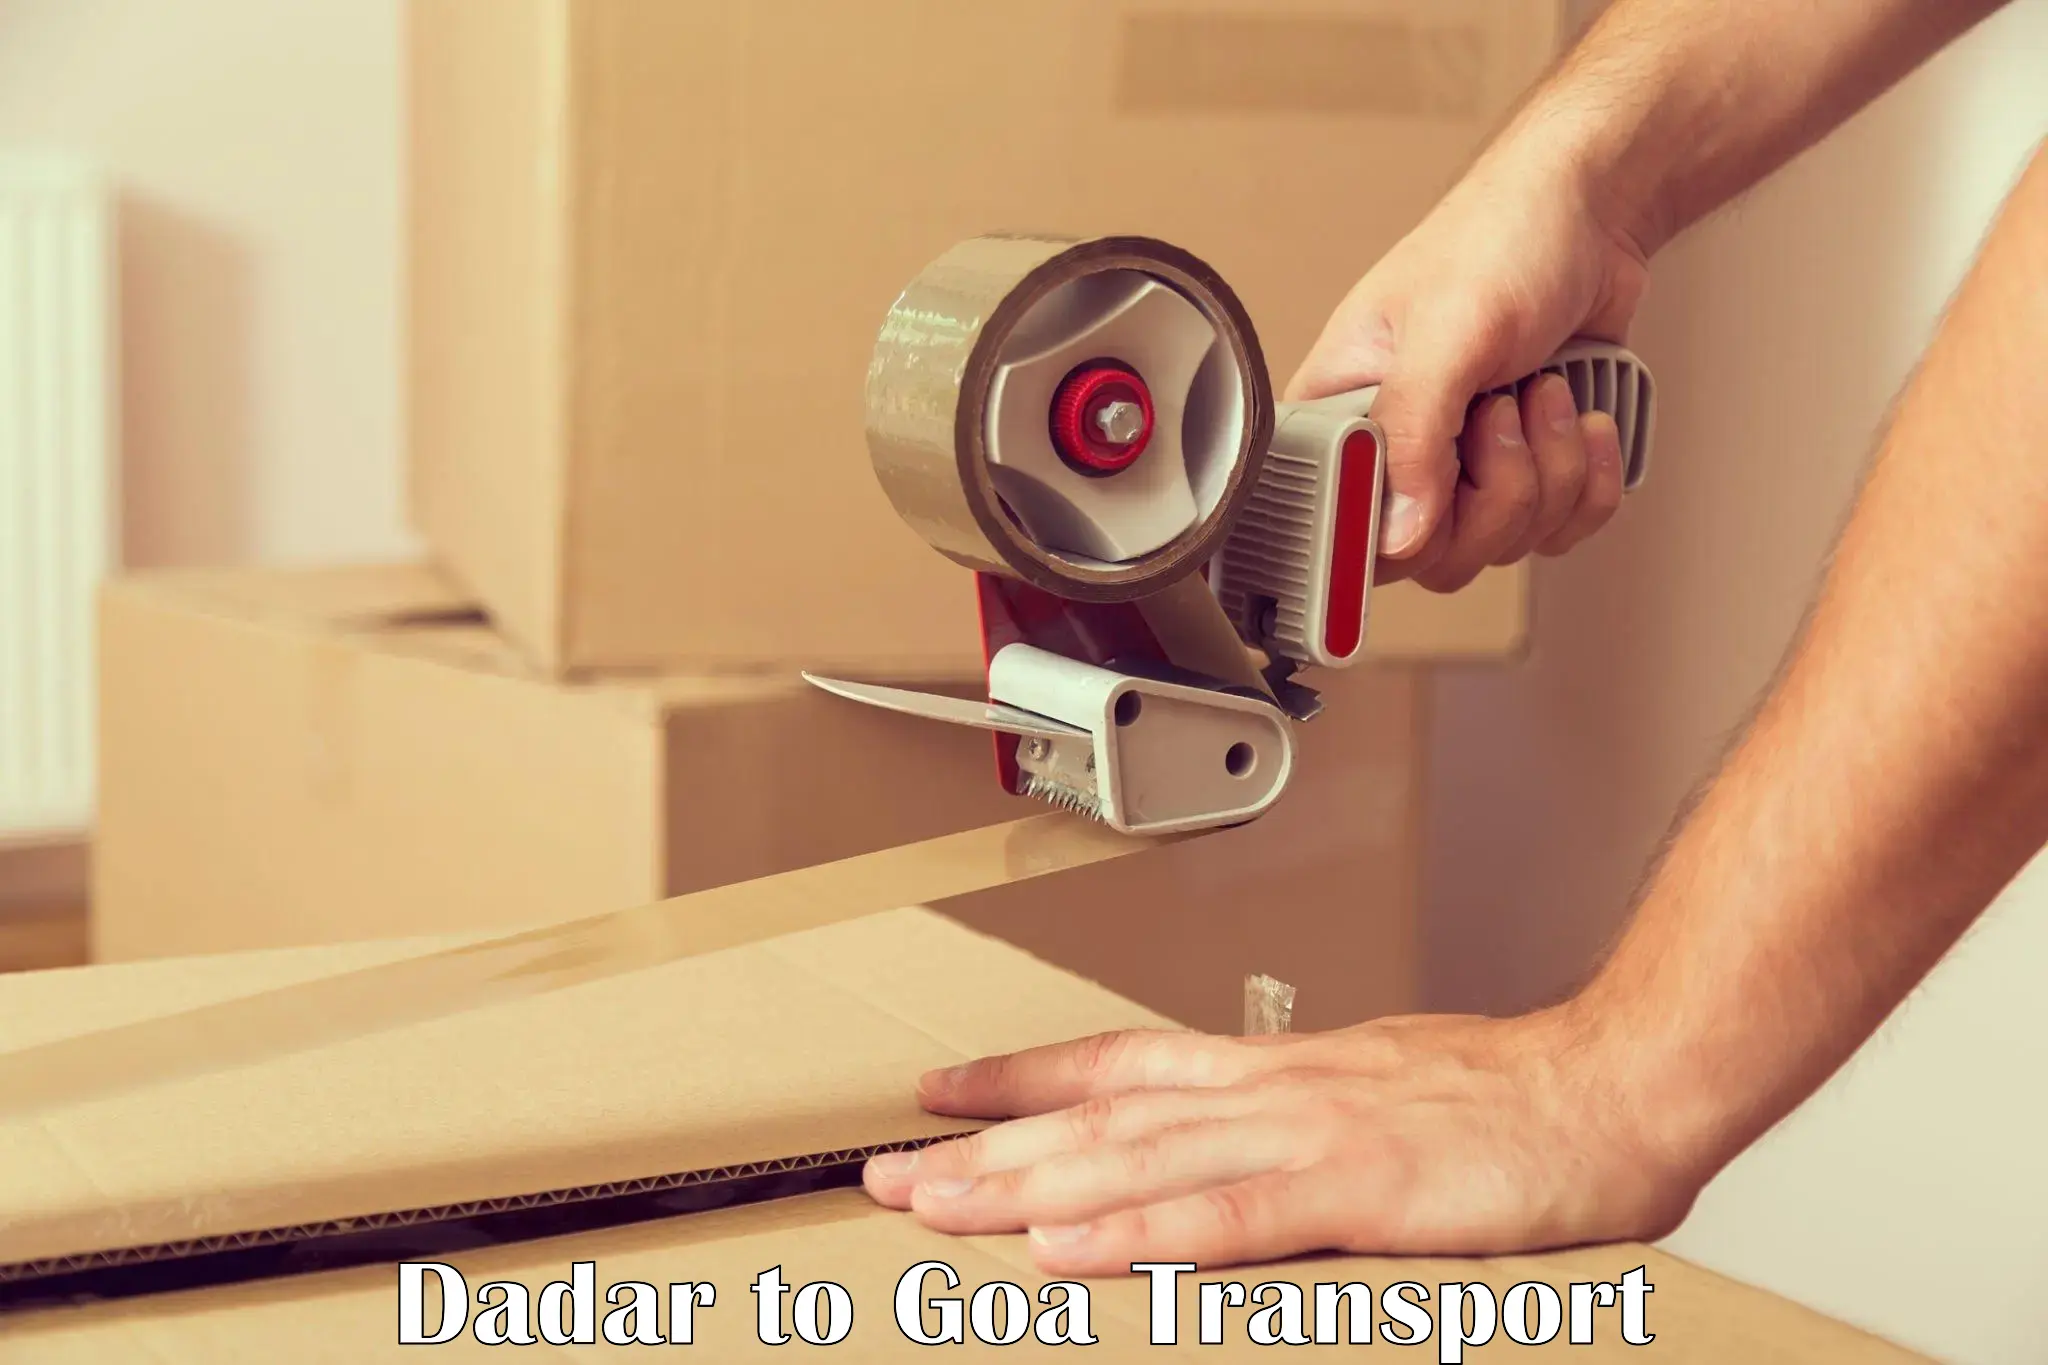 Delivery service Dadar to Goa